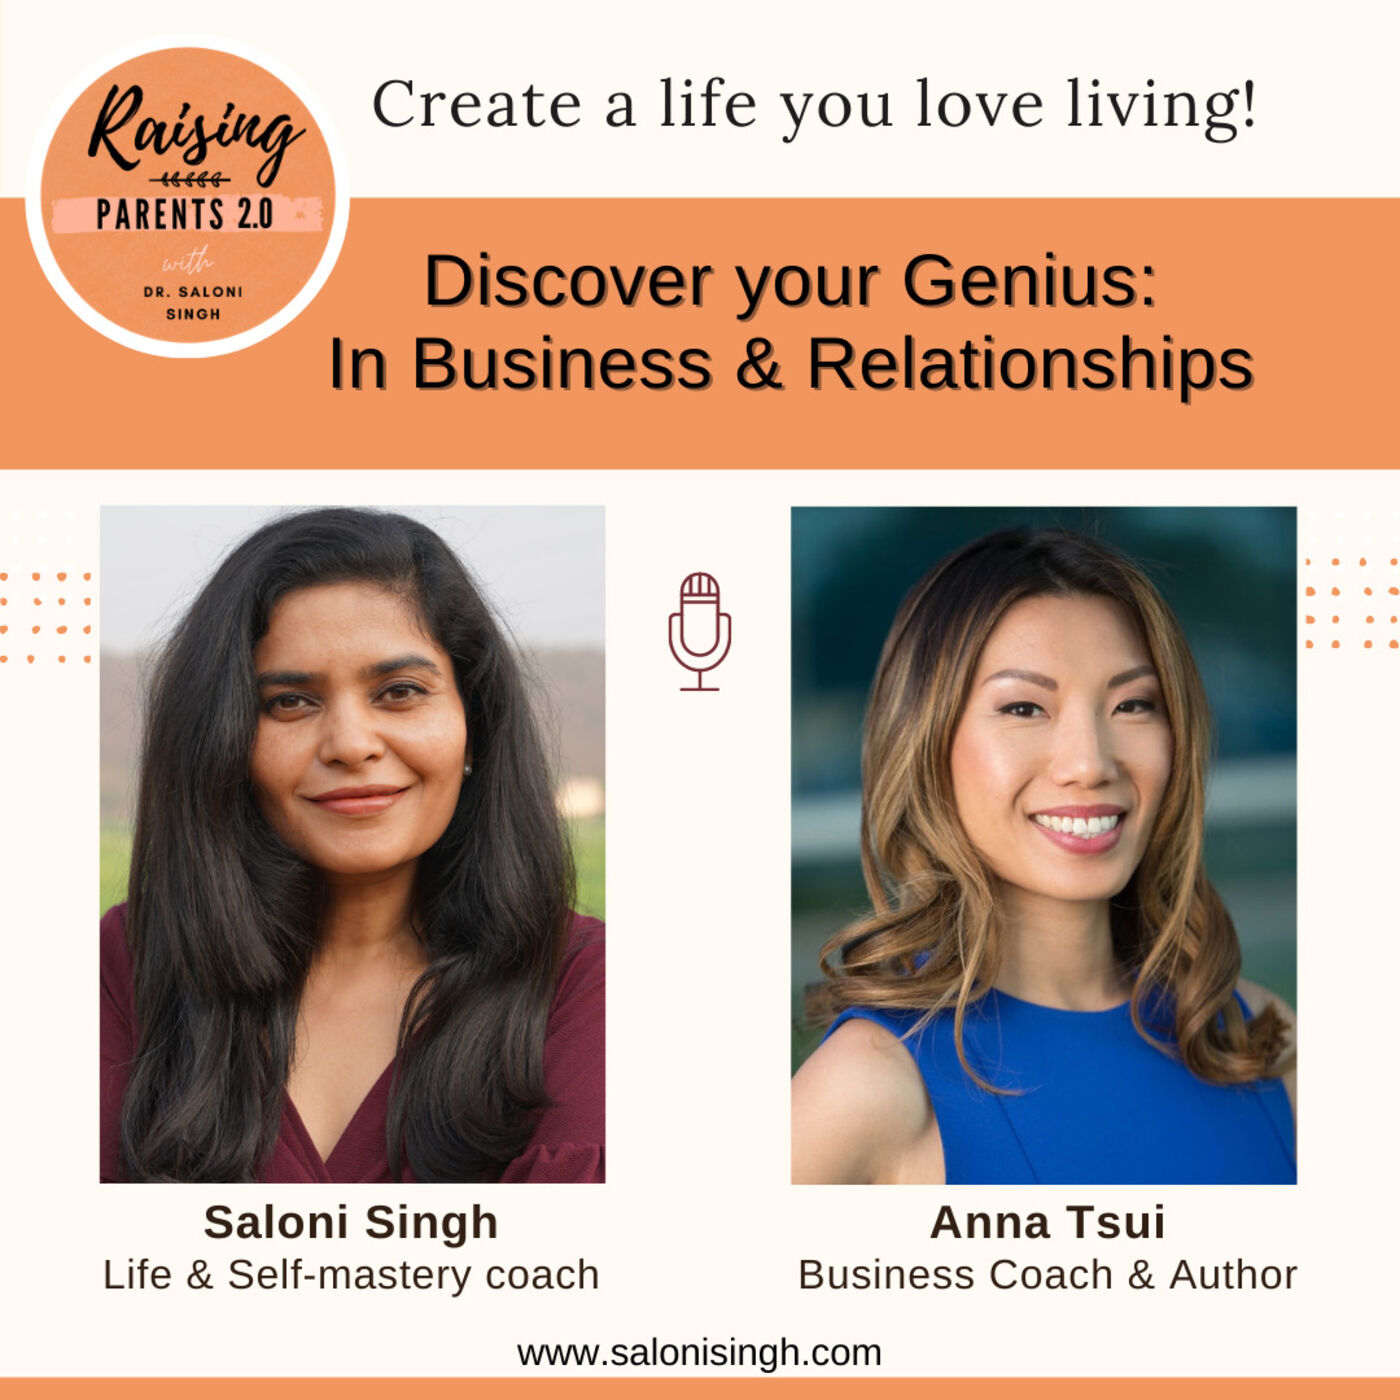 Discover your Genius in Business & Relationships with Anna Tsui